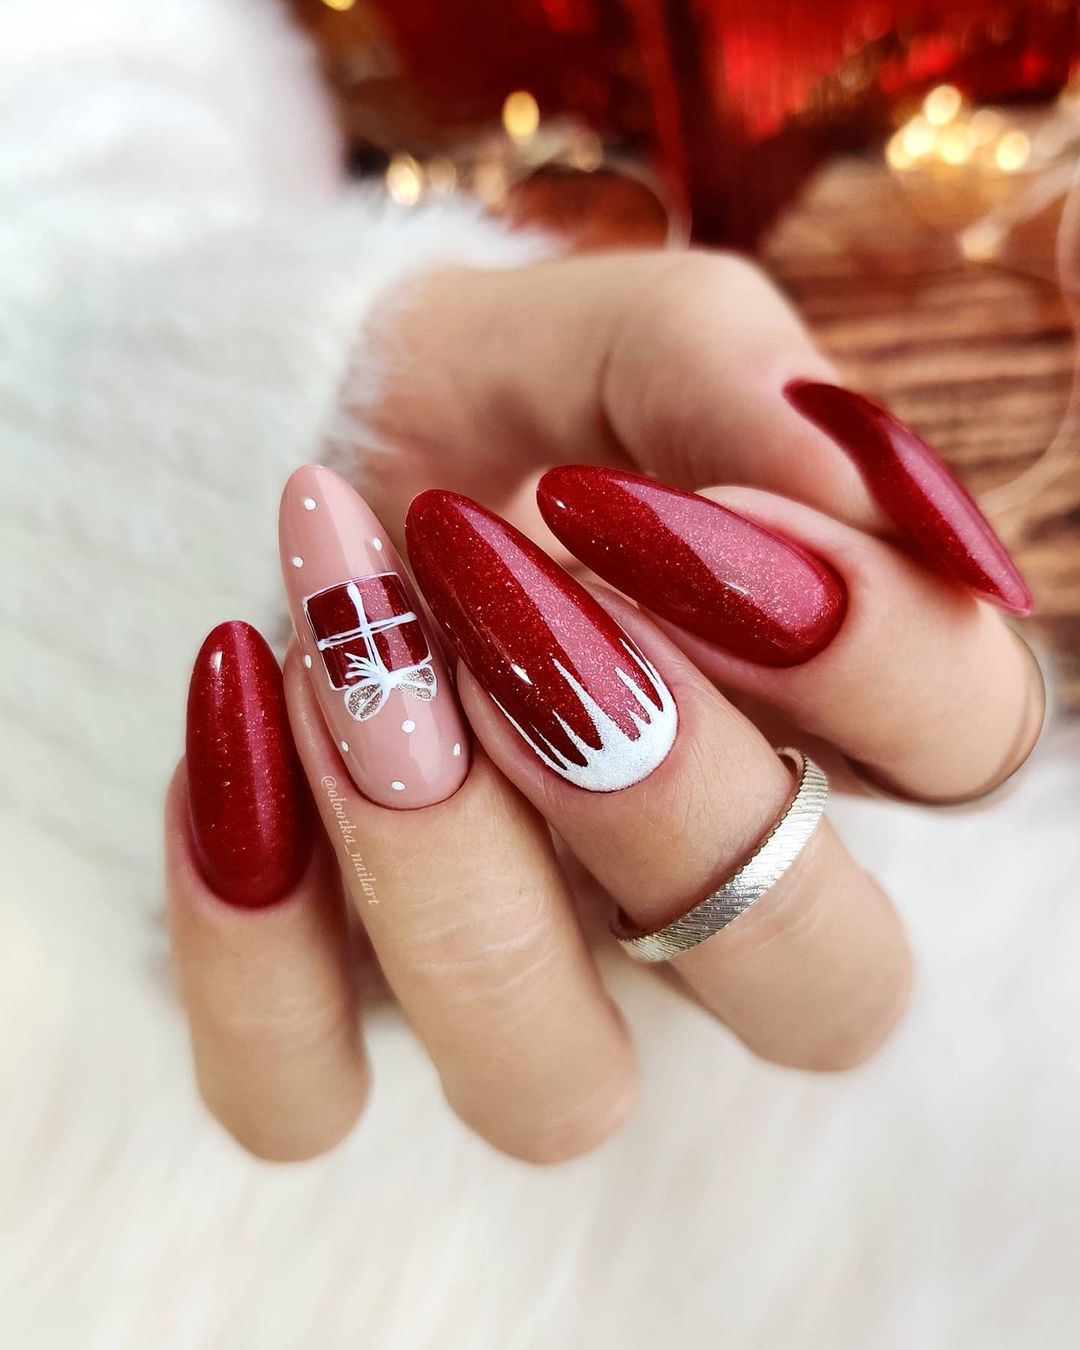 Long Sparkly Nails with Christmas Design